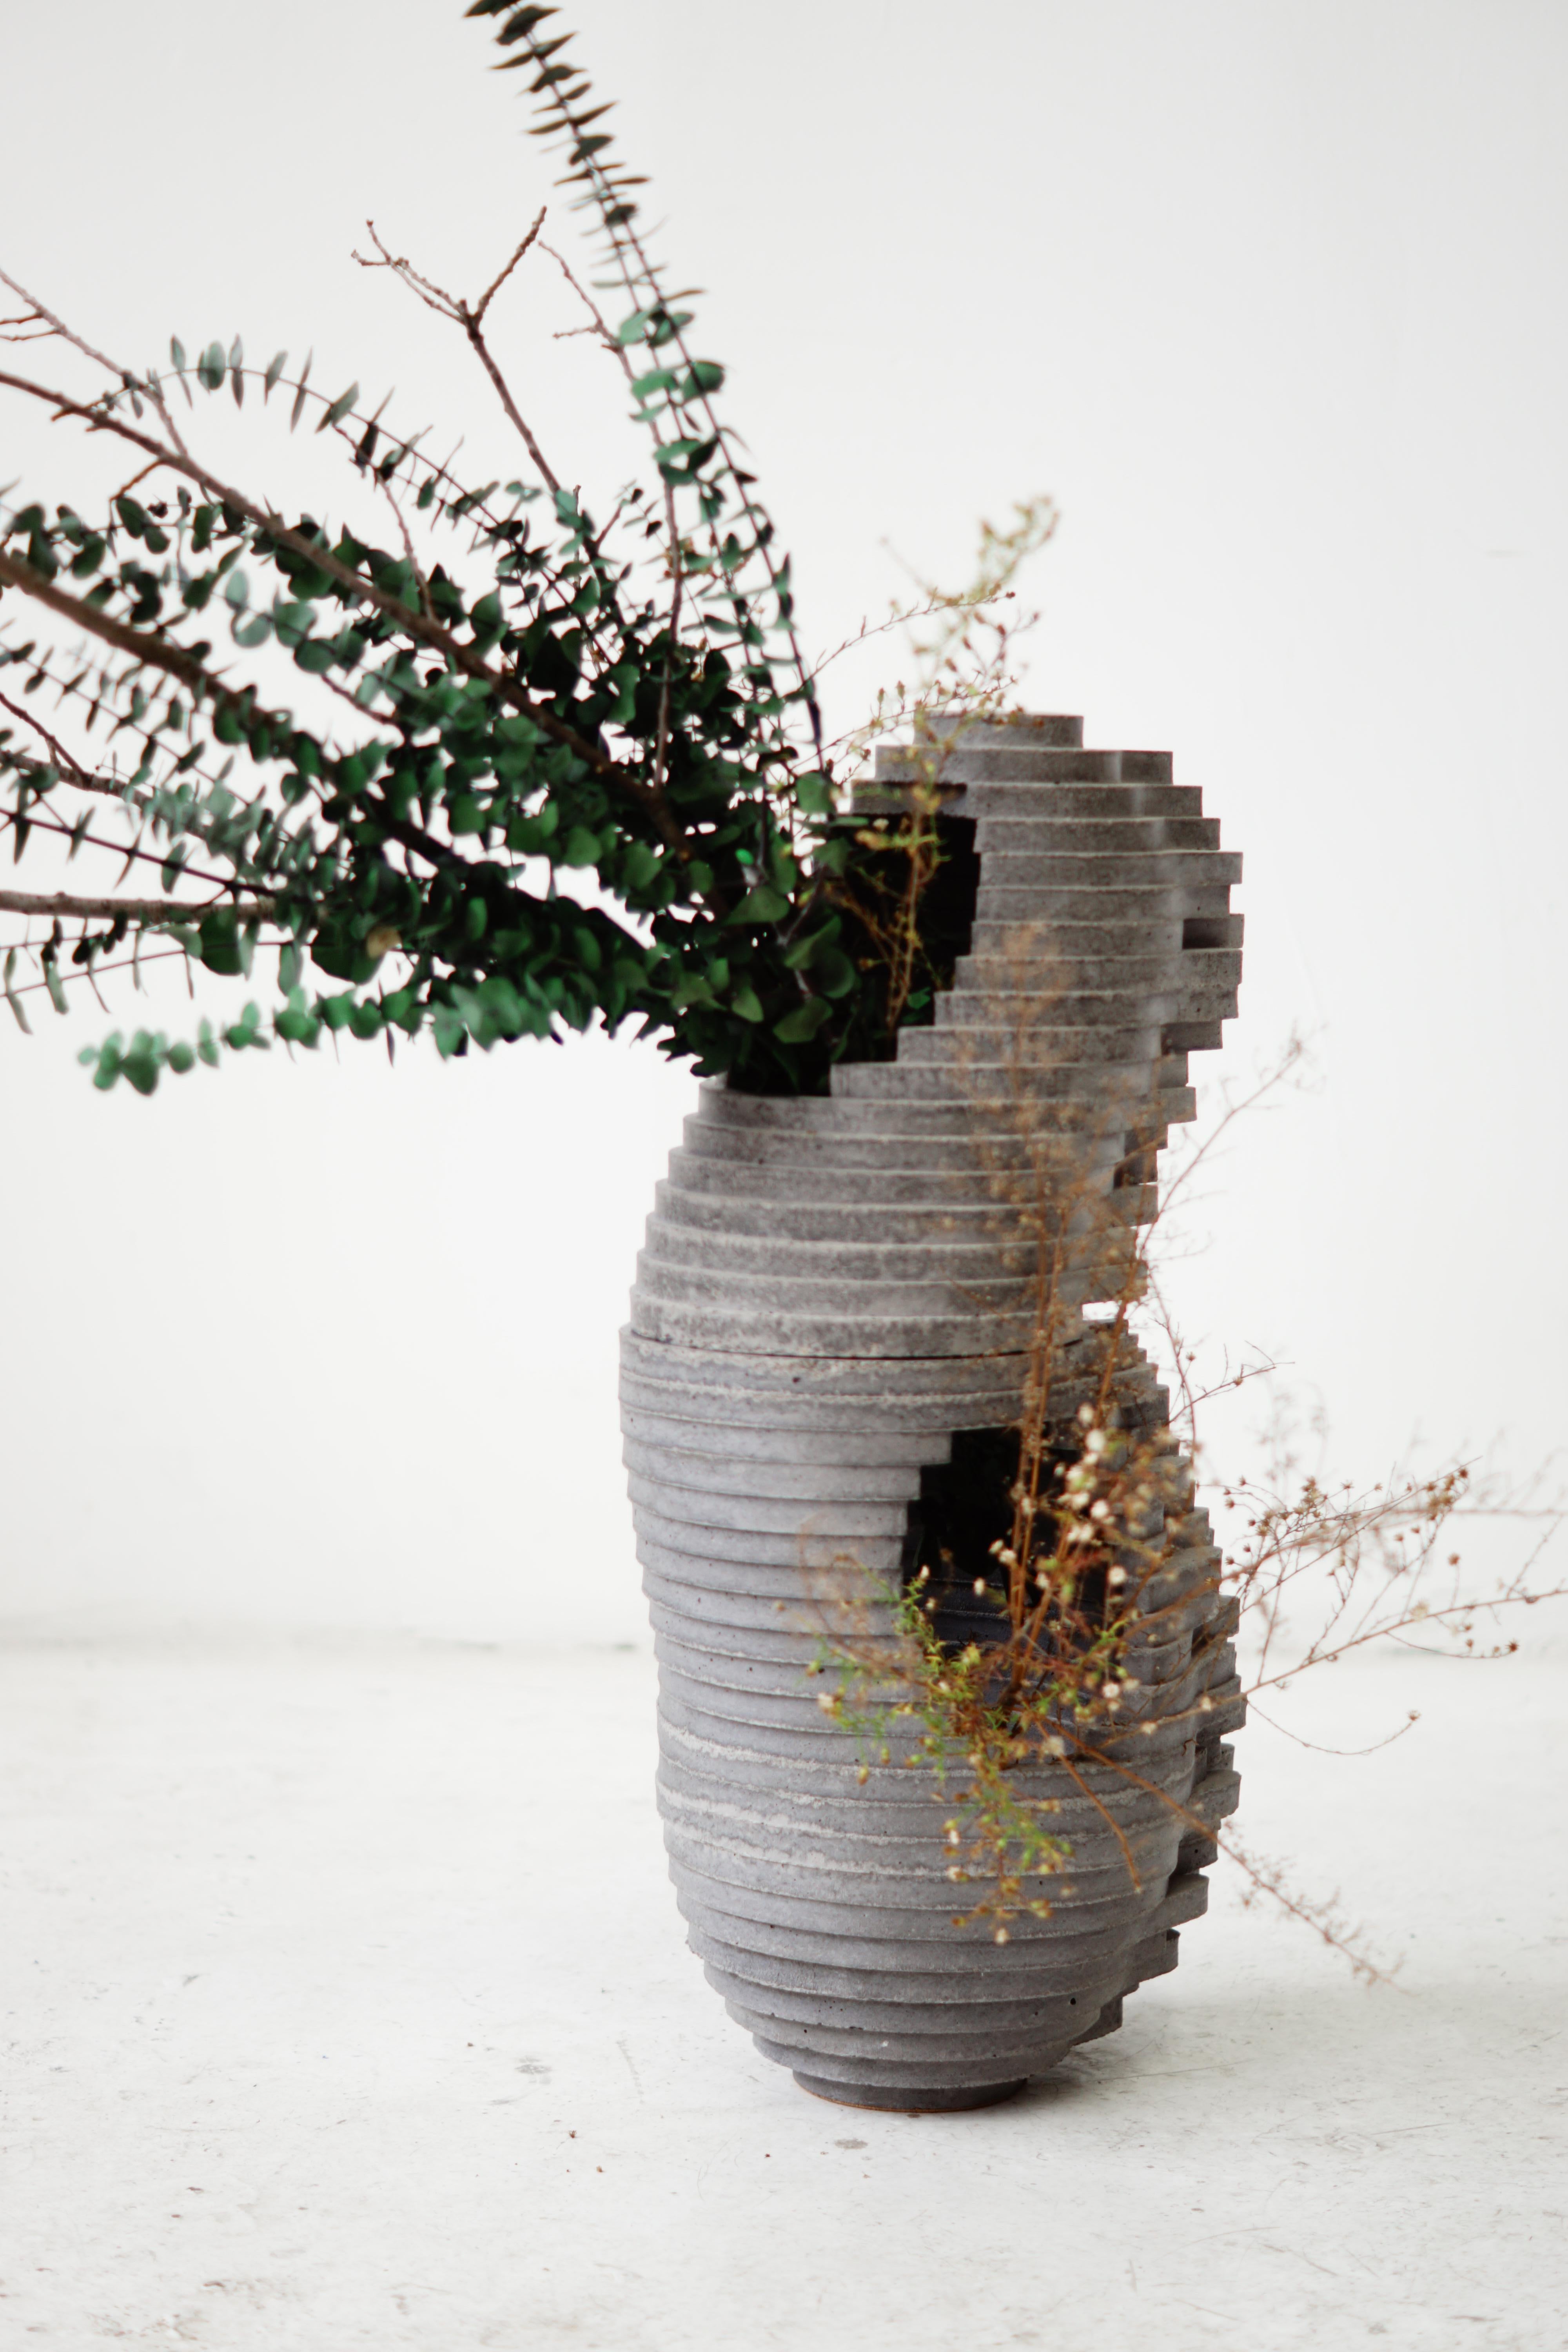 Ikebana-style, hand-cast vessel in two parts for indoor and outdoor use.

At the intersection of art, craft, and design, Concrete Poetics' debut collection of hand-cast cement sculptural furniture and accessories streamlines visually intriguing